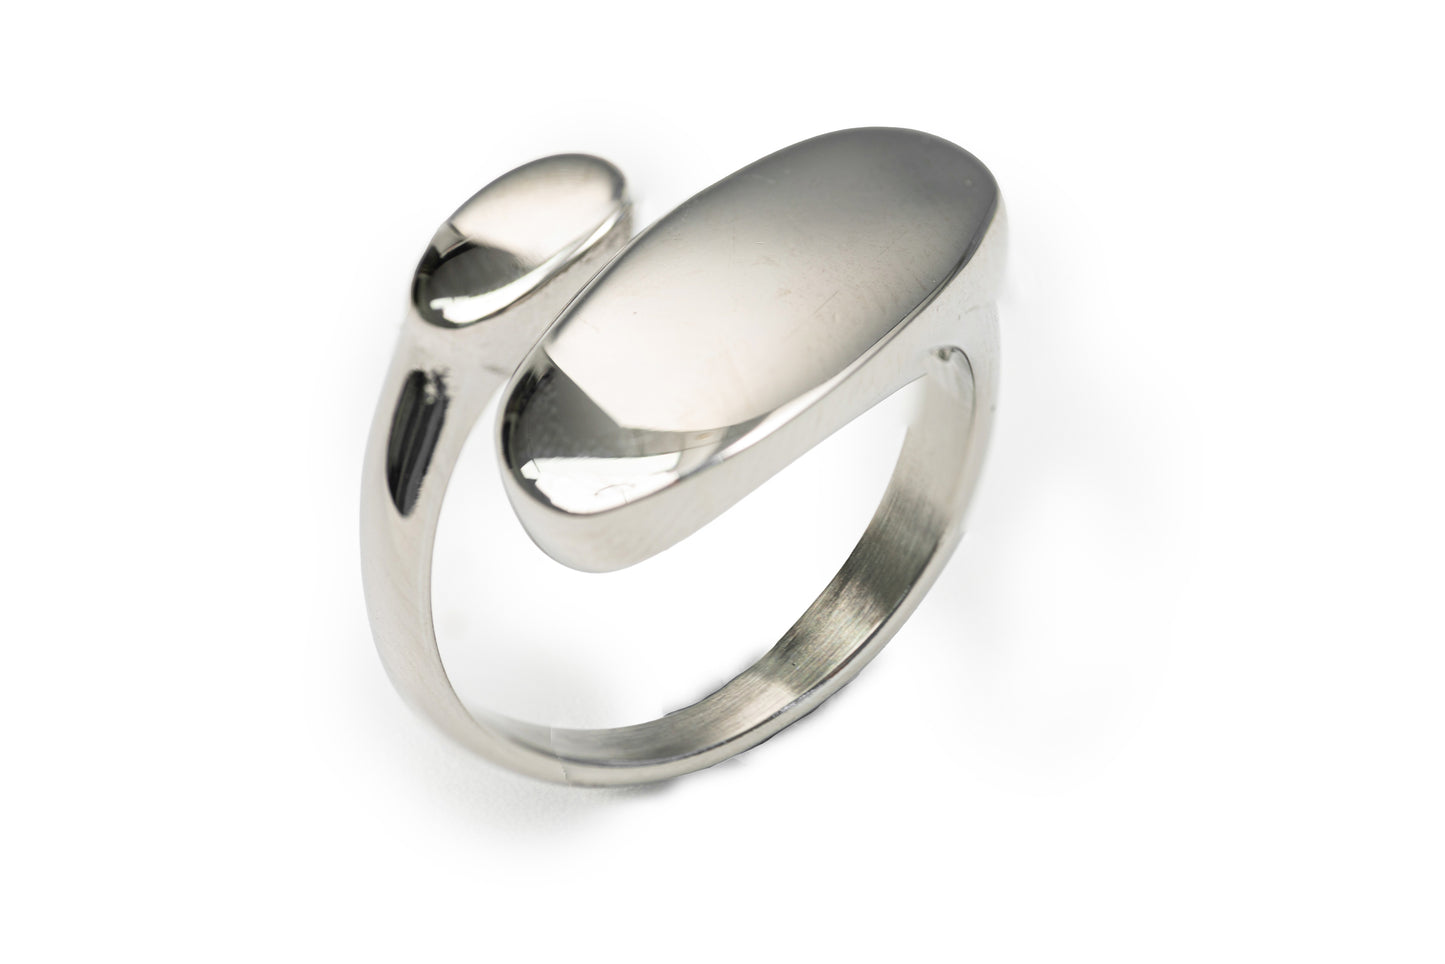 Planderful Glazed Curve Ring - Silver Ring for Women